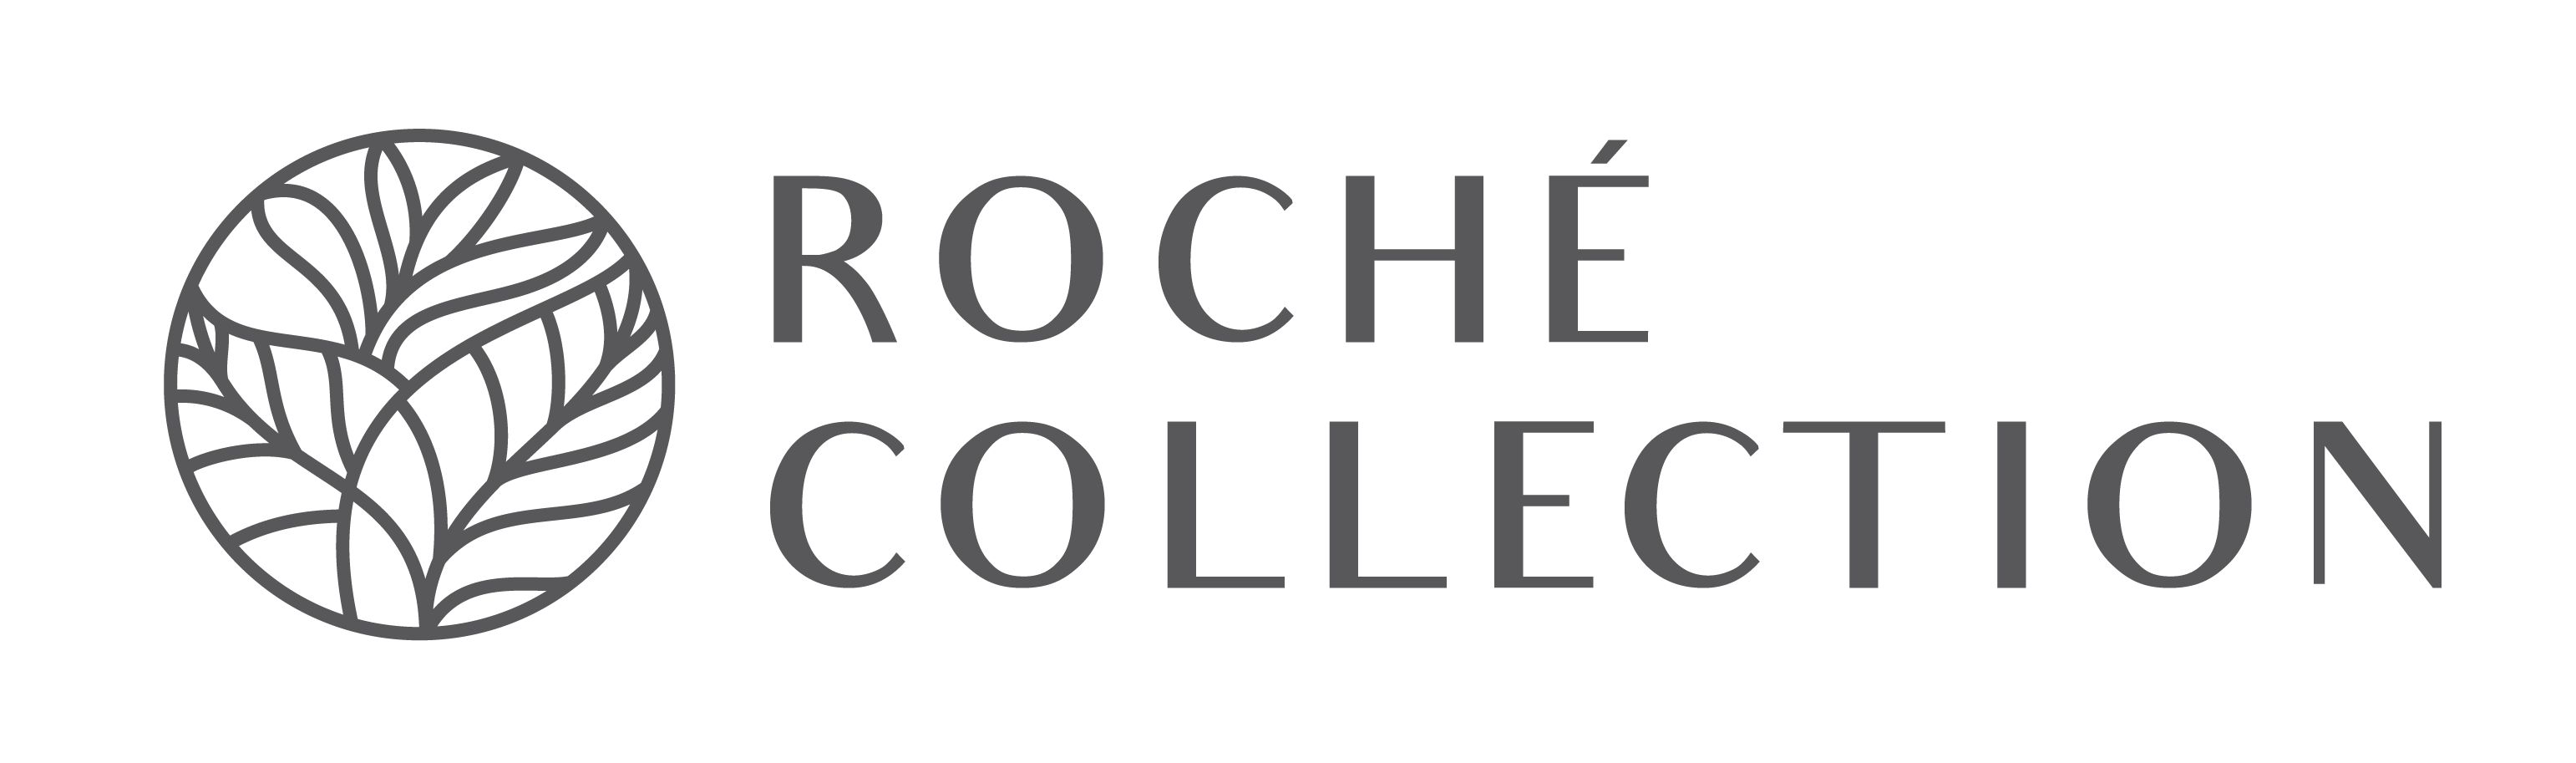 The Roche Collection